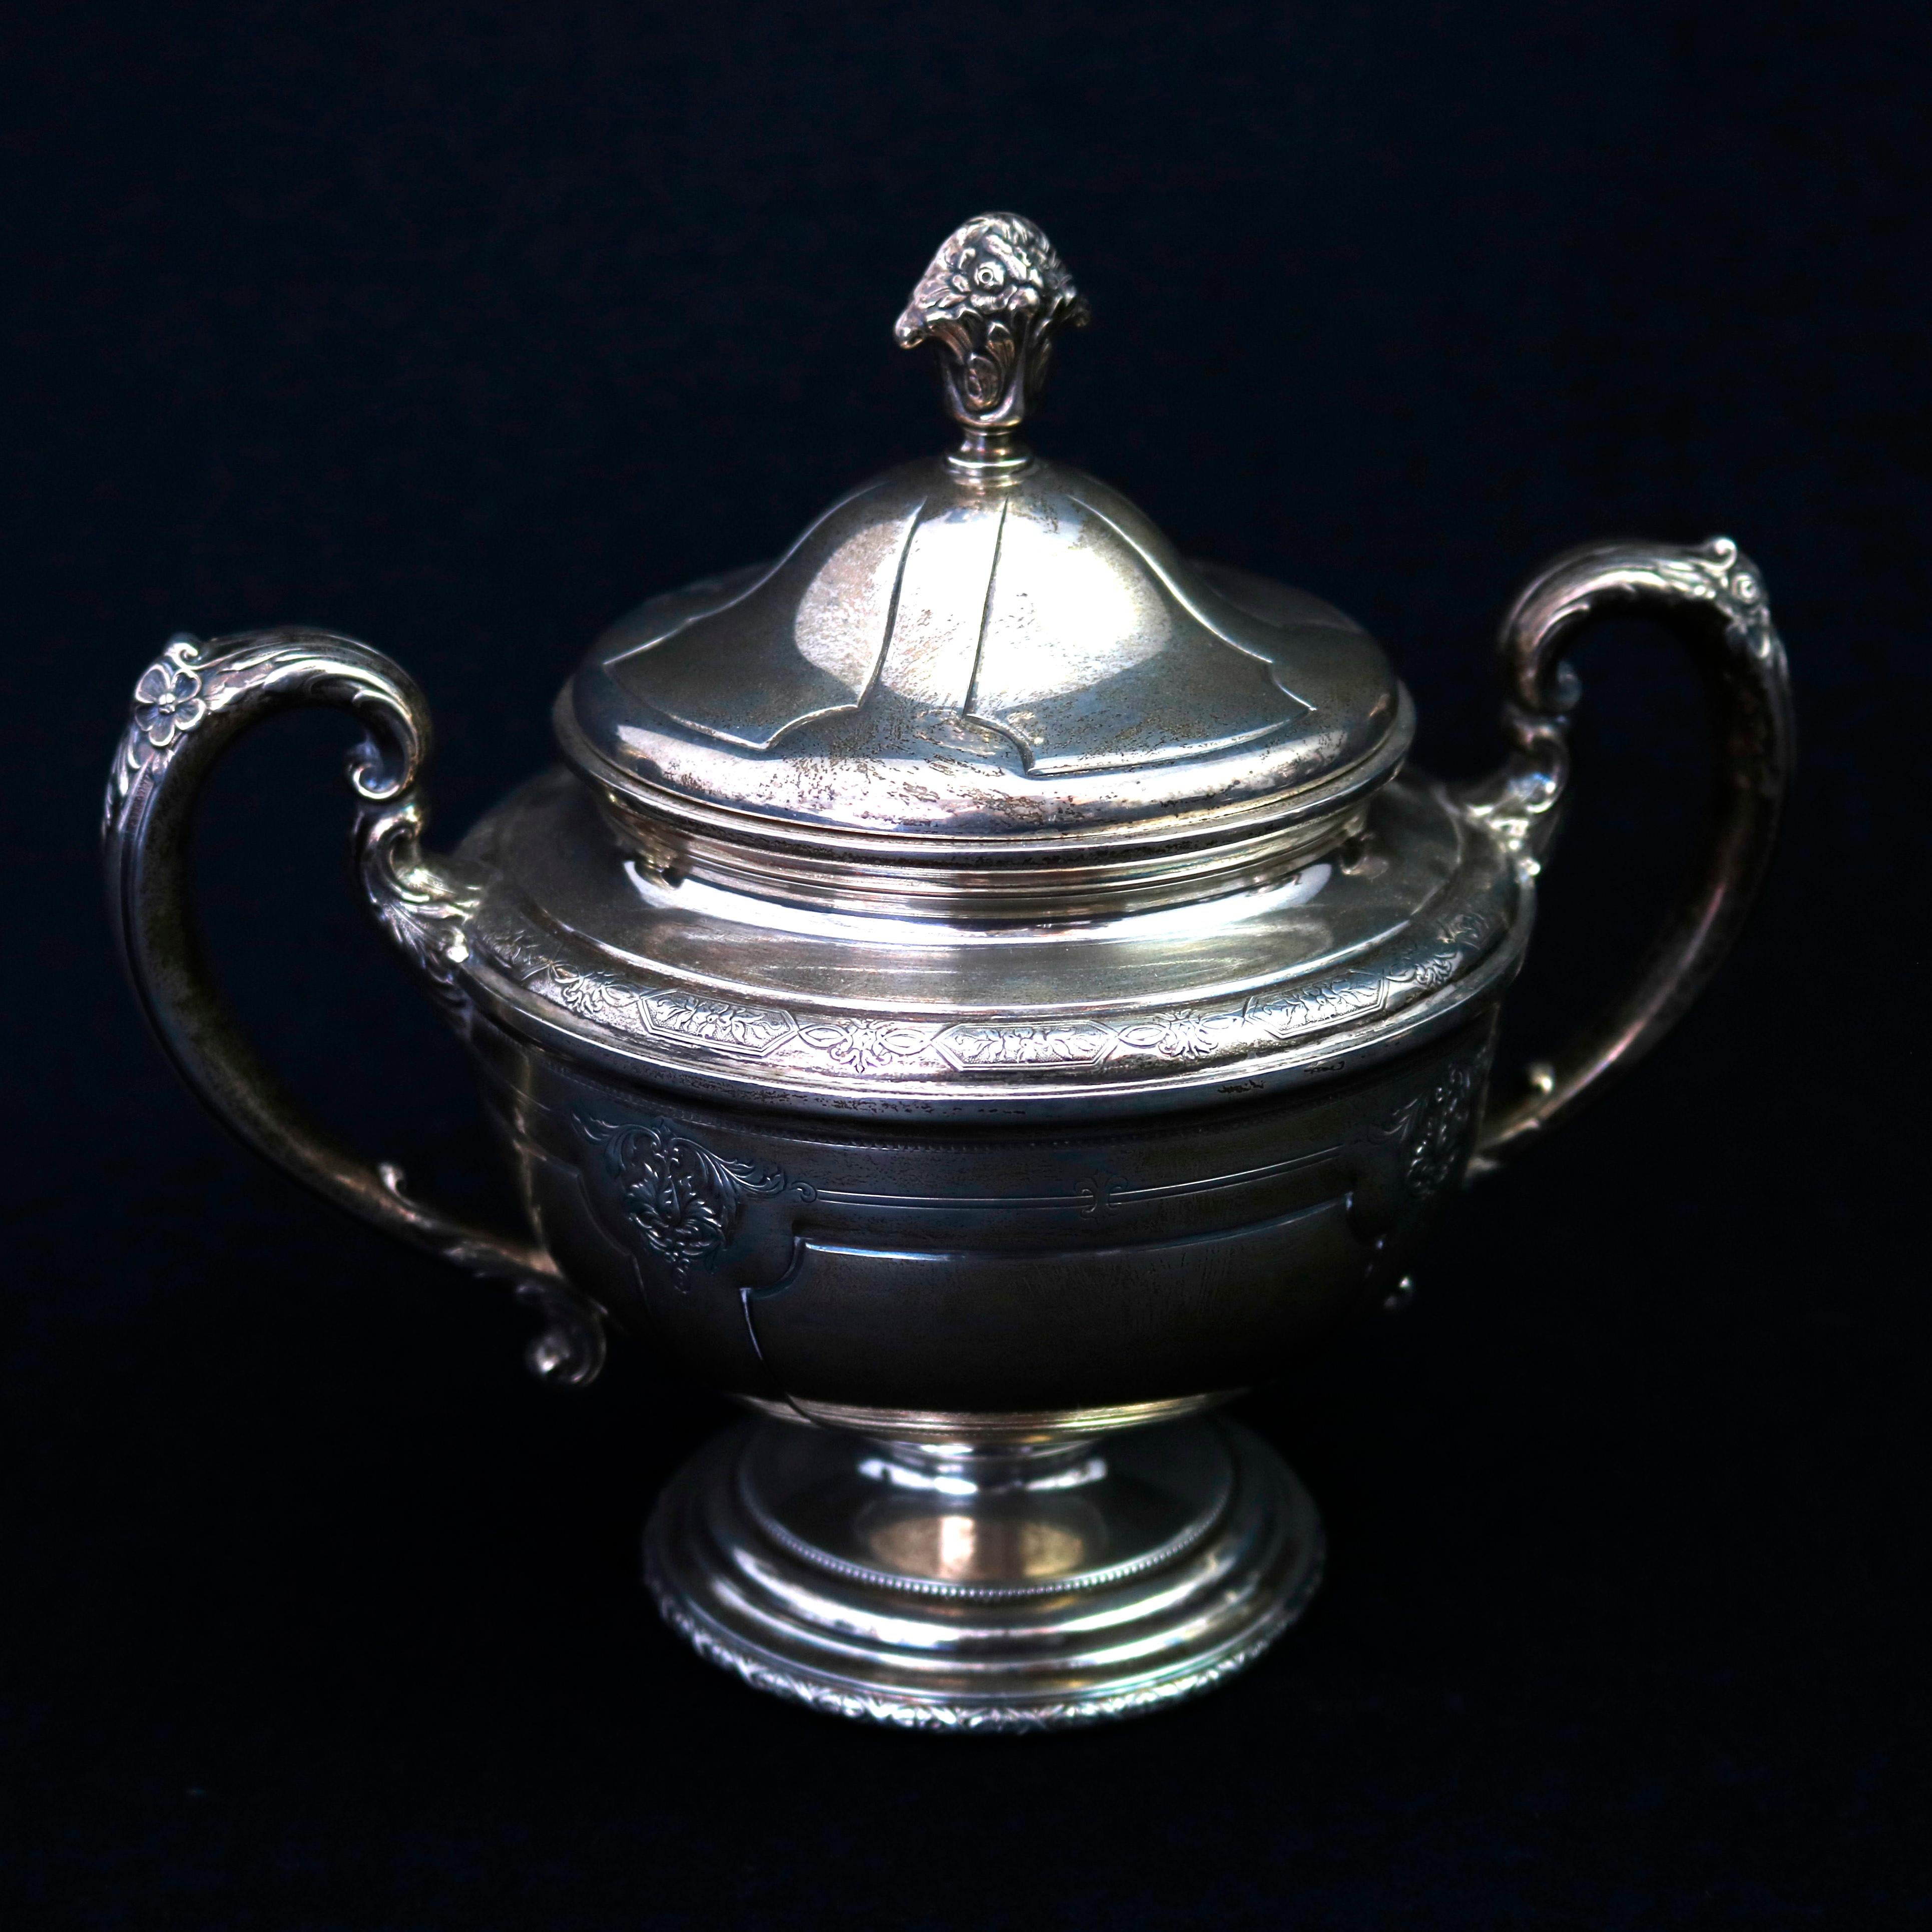 Cast Antique French Louis XIV Style Sterling Silver Tea Set by Tole, circa 1920